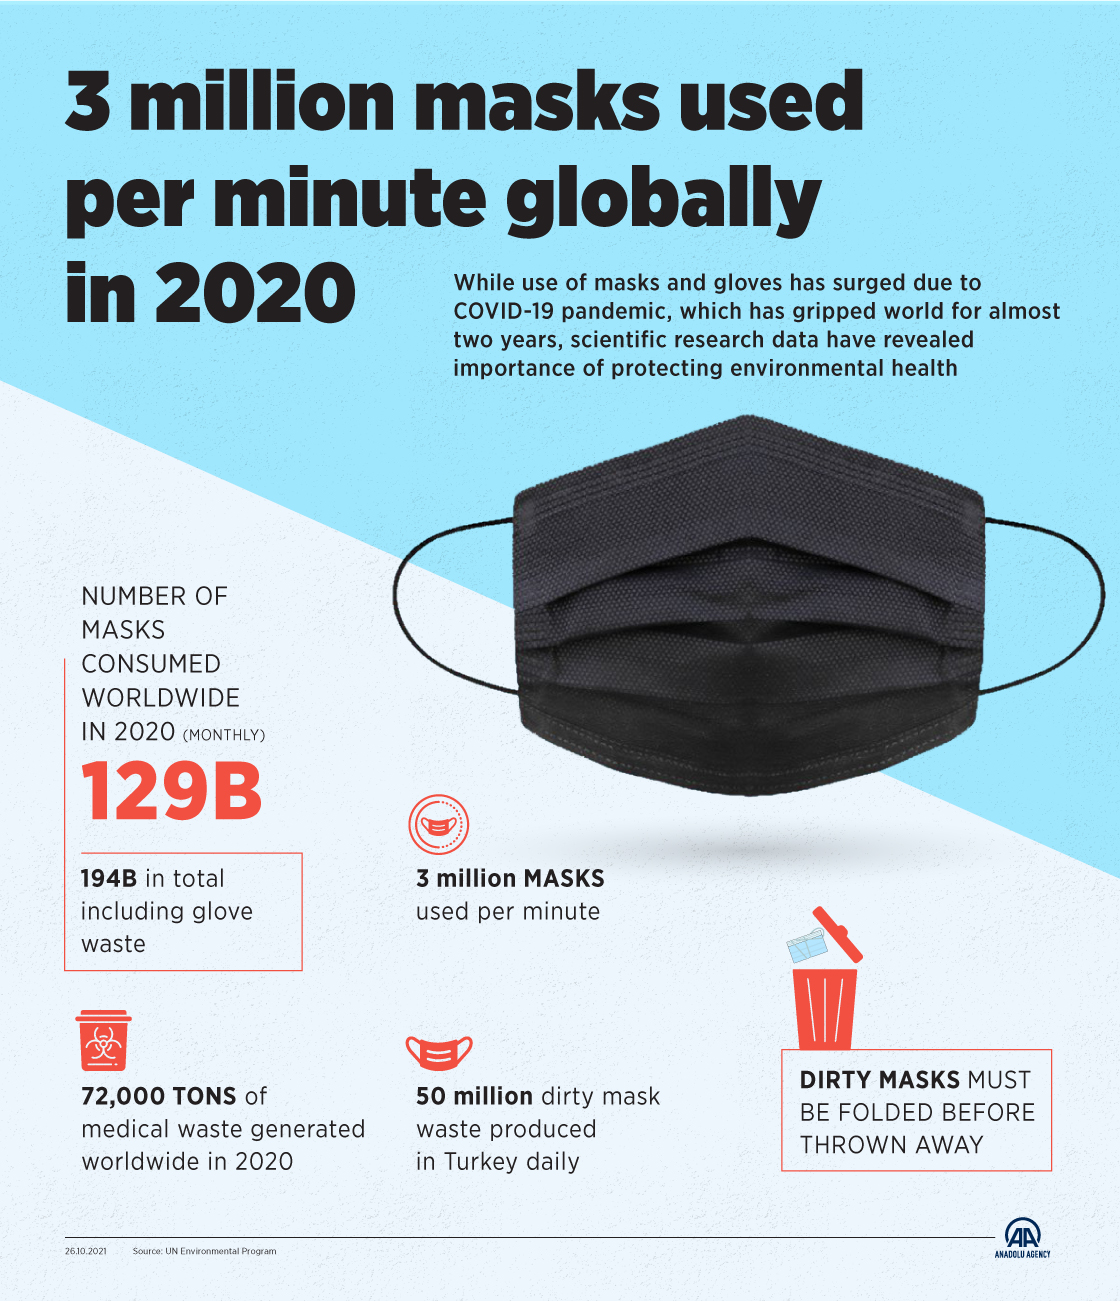 3M masks used per minute globally in 2020